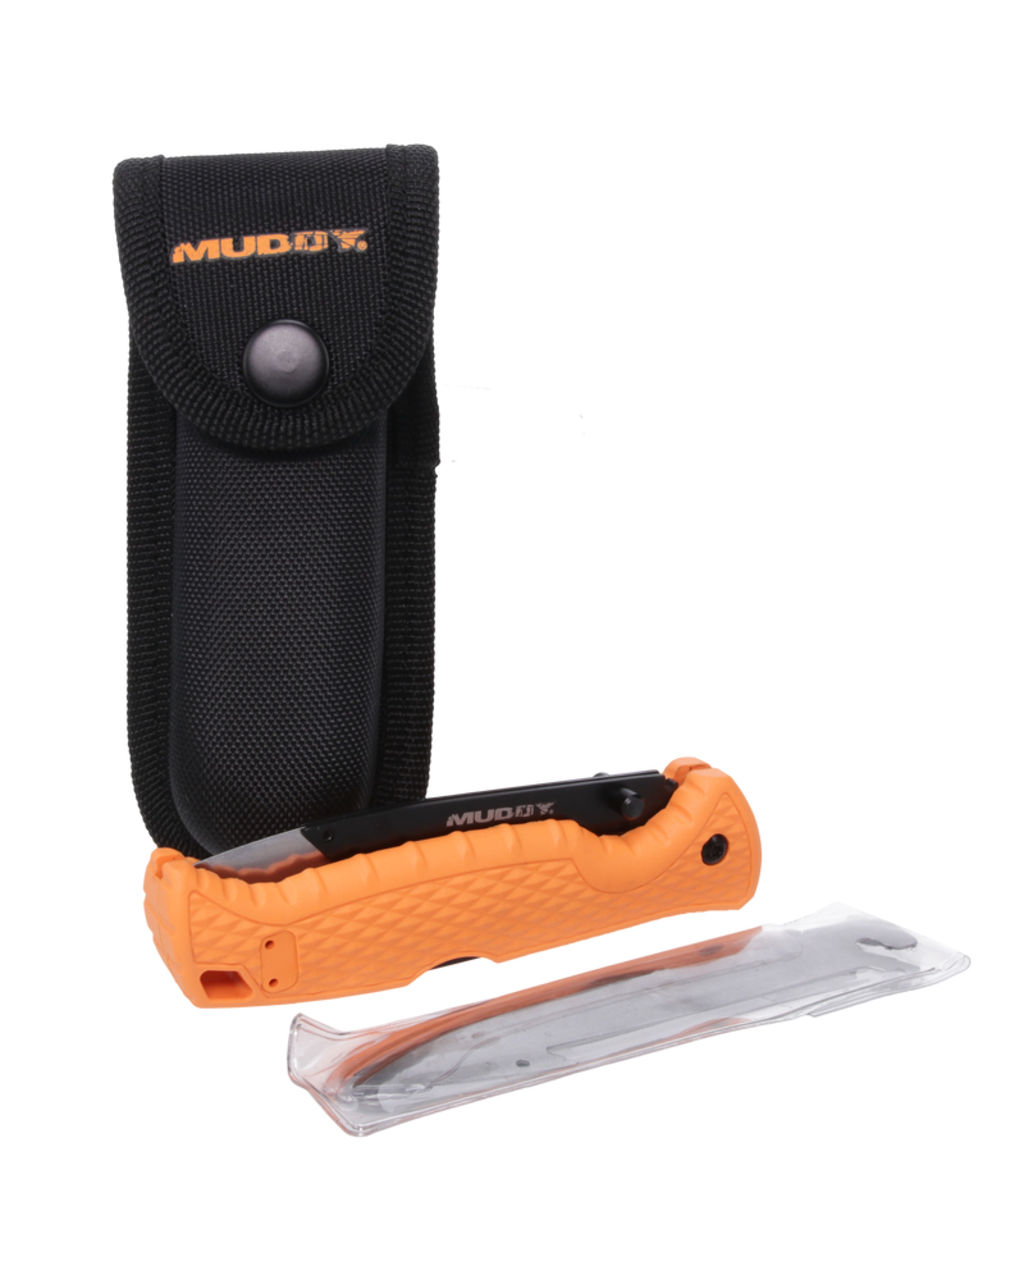 Muddy Replace-A-Blade Utility Knife with 5 Spare Interchangeable